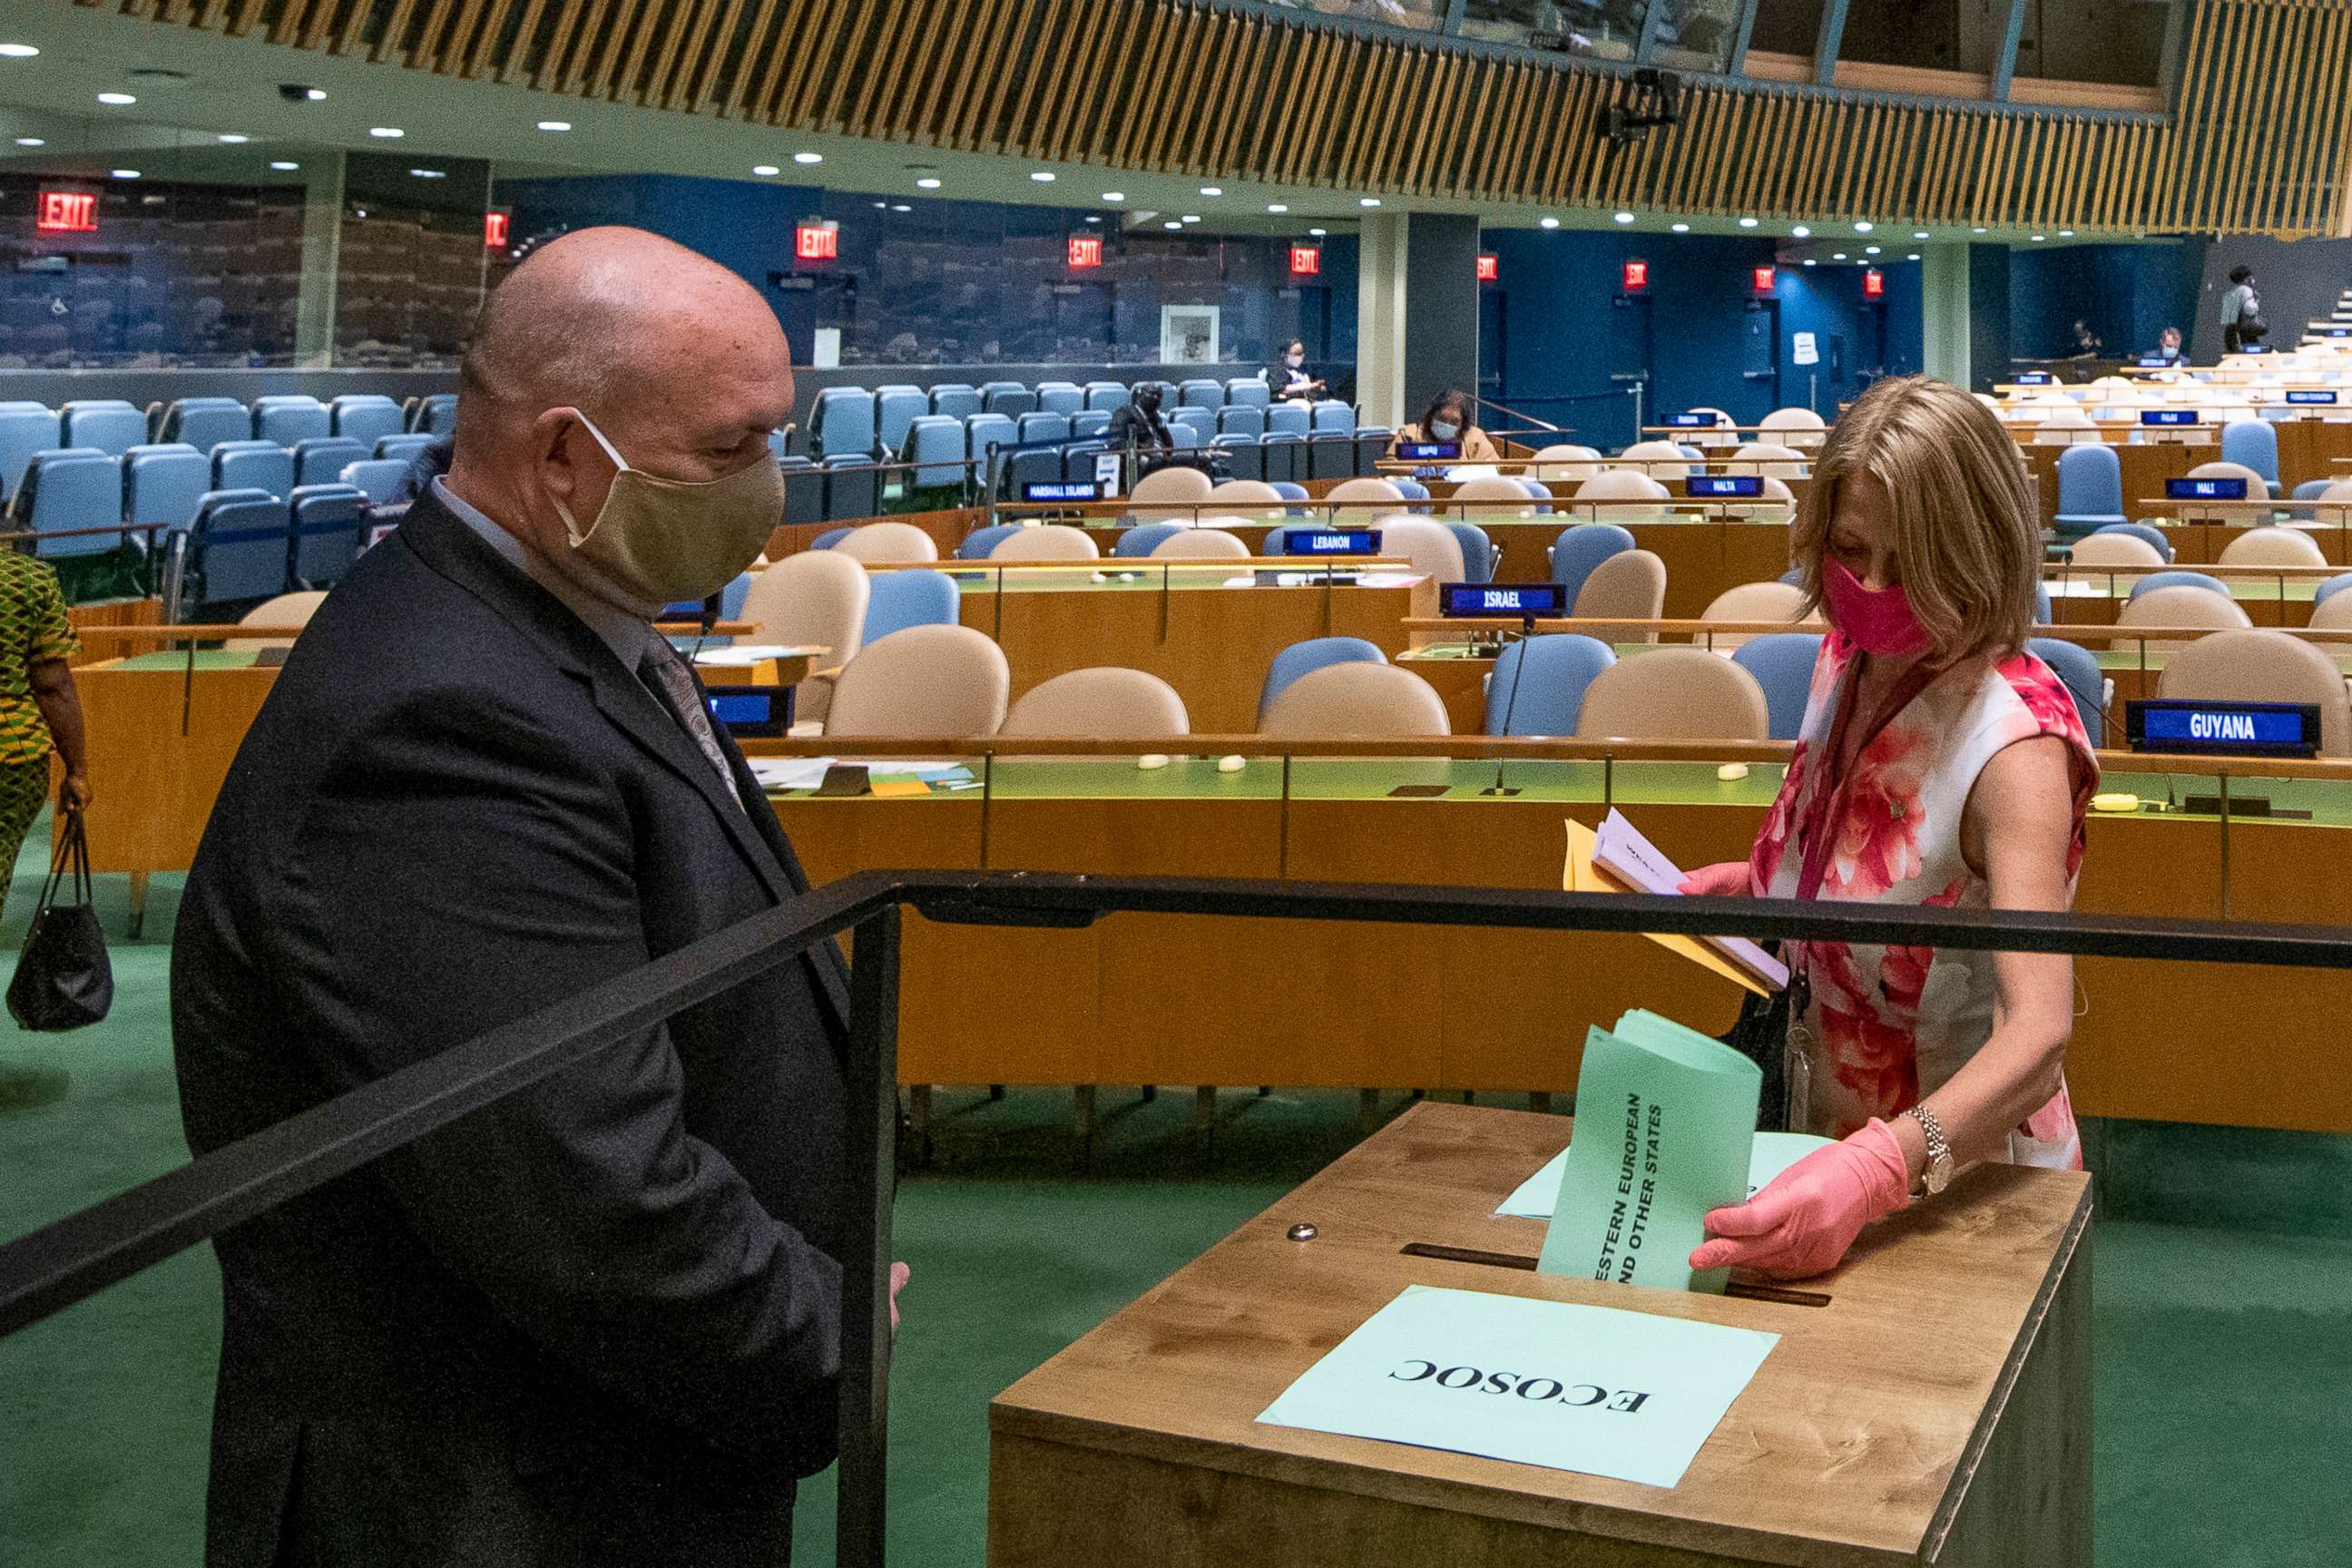 PHOTO: Norway's ambassador to the United Nations, Mona Juul, casts a vote during U.N. elections, June 17, 2020, at U.N. headquarters in New York.